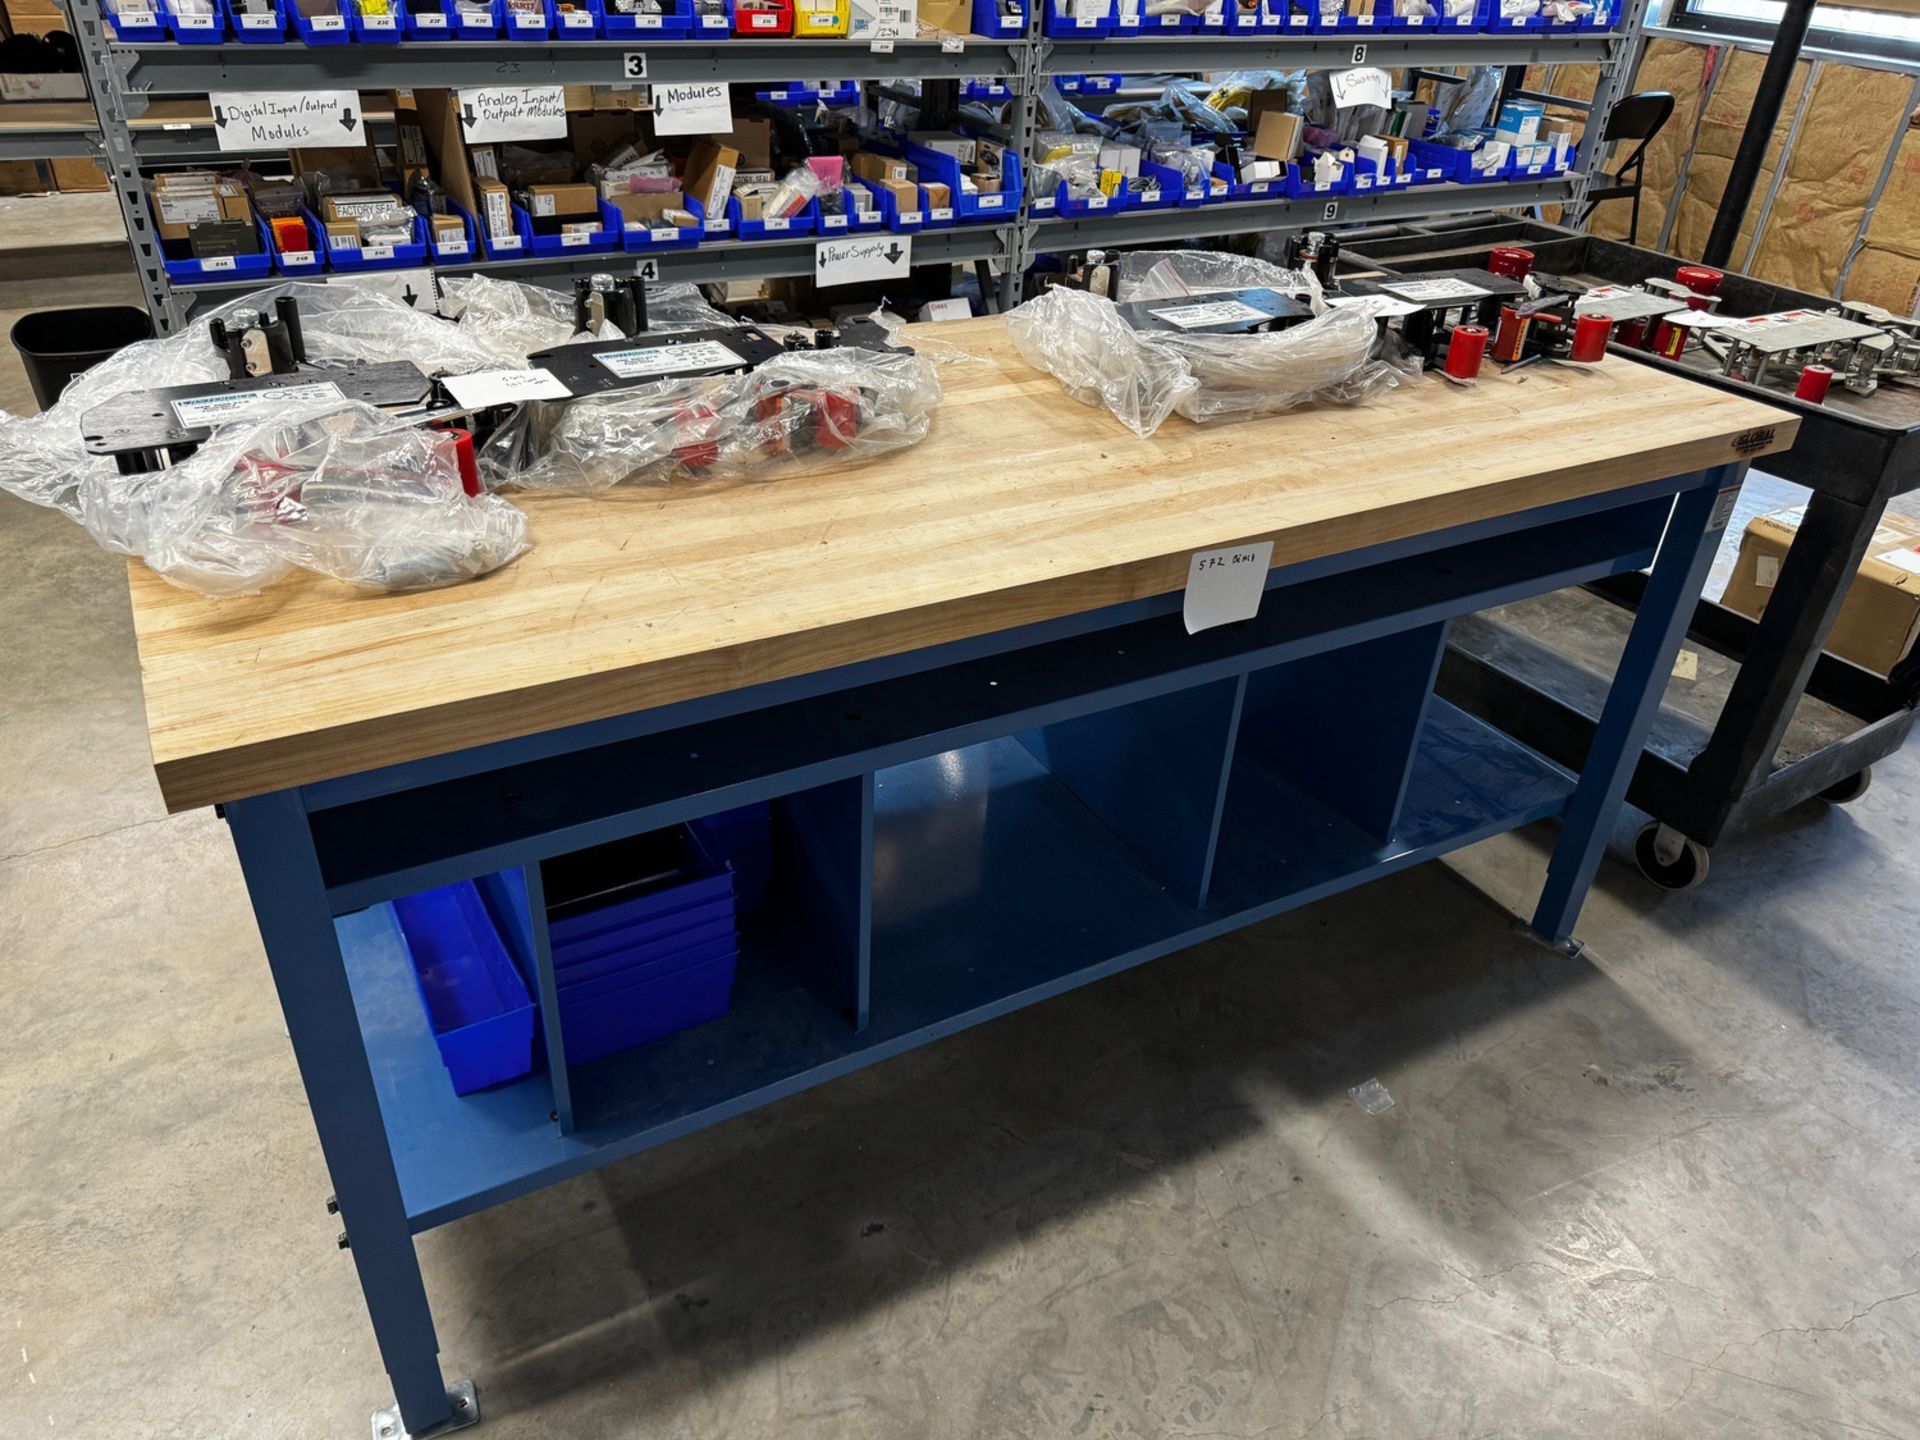 Global Wood Top Work Bench - Bench Only No Contents | Rig Fee $175